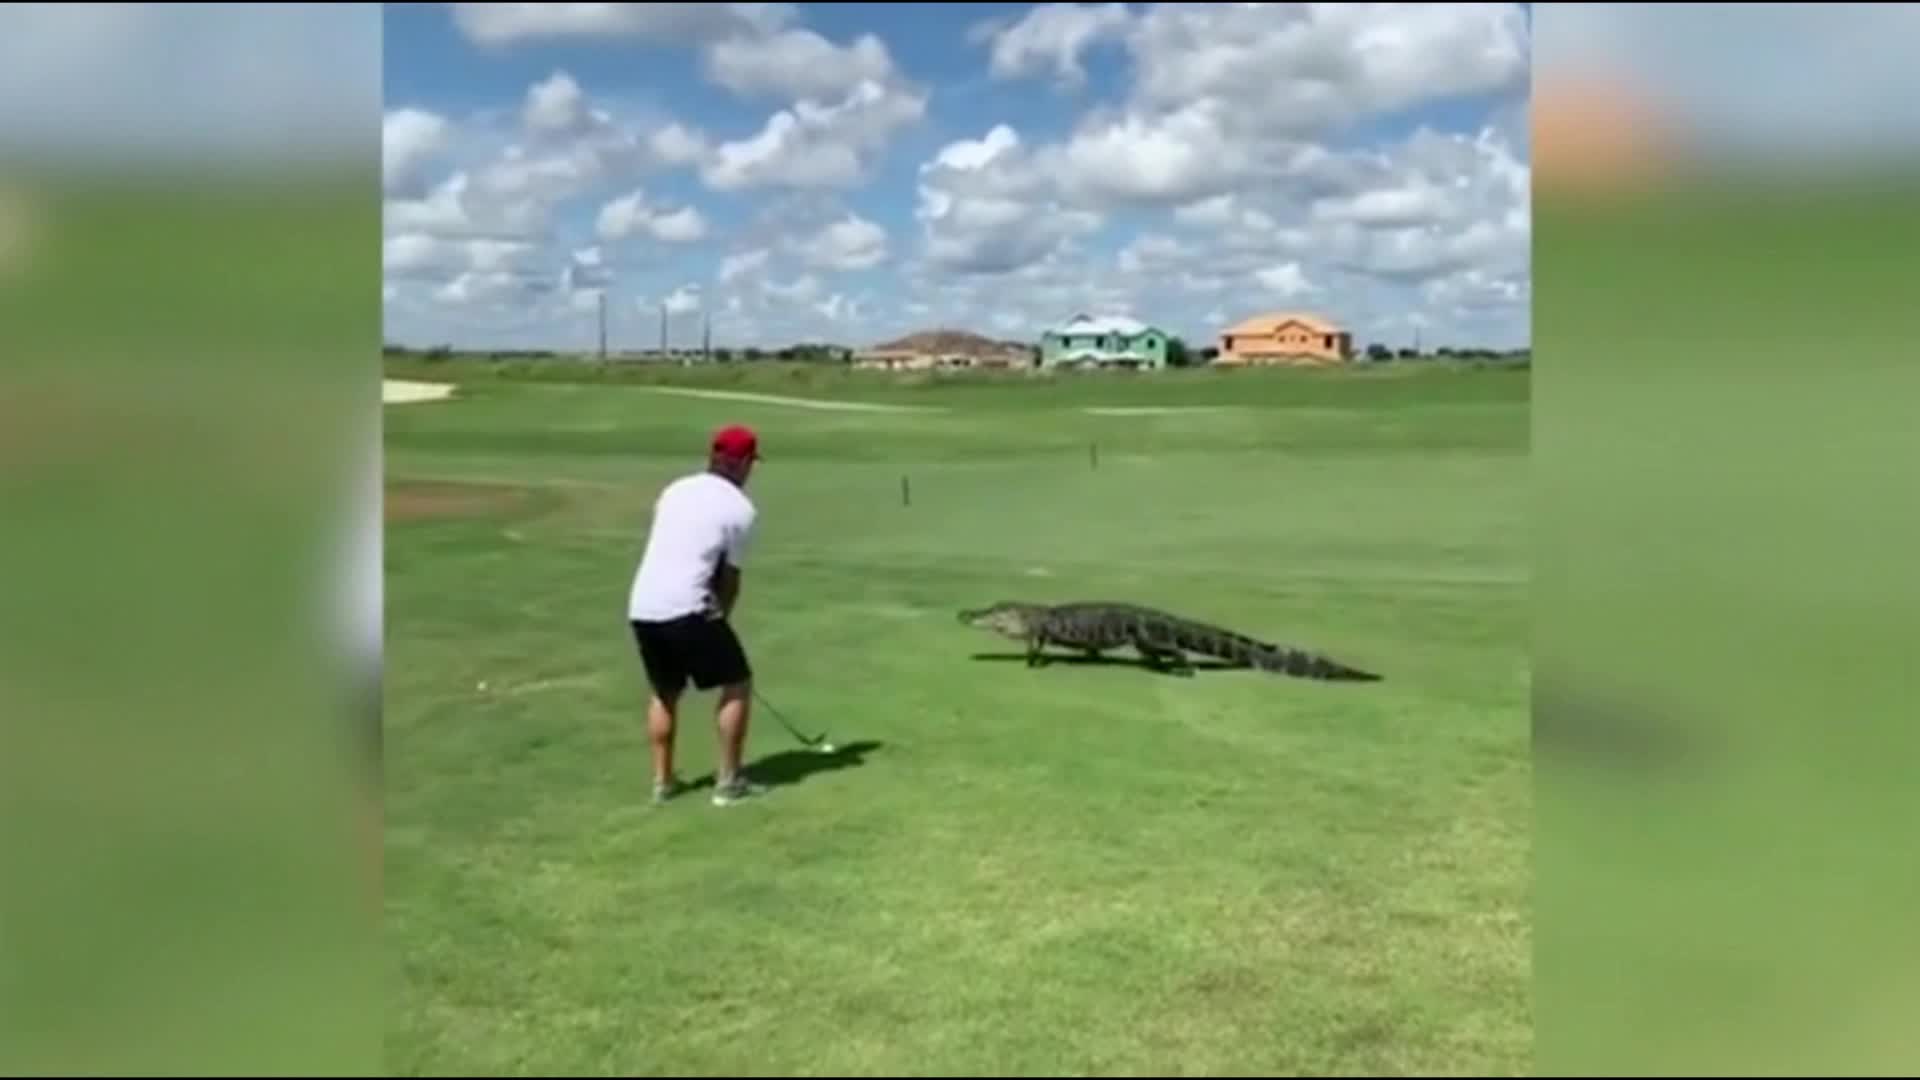 On the golf course, the crocodile climbed over the man and continued to play calmly.